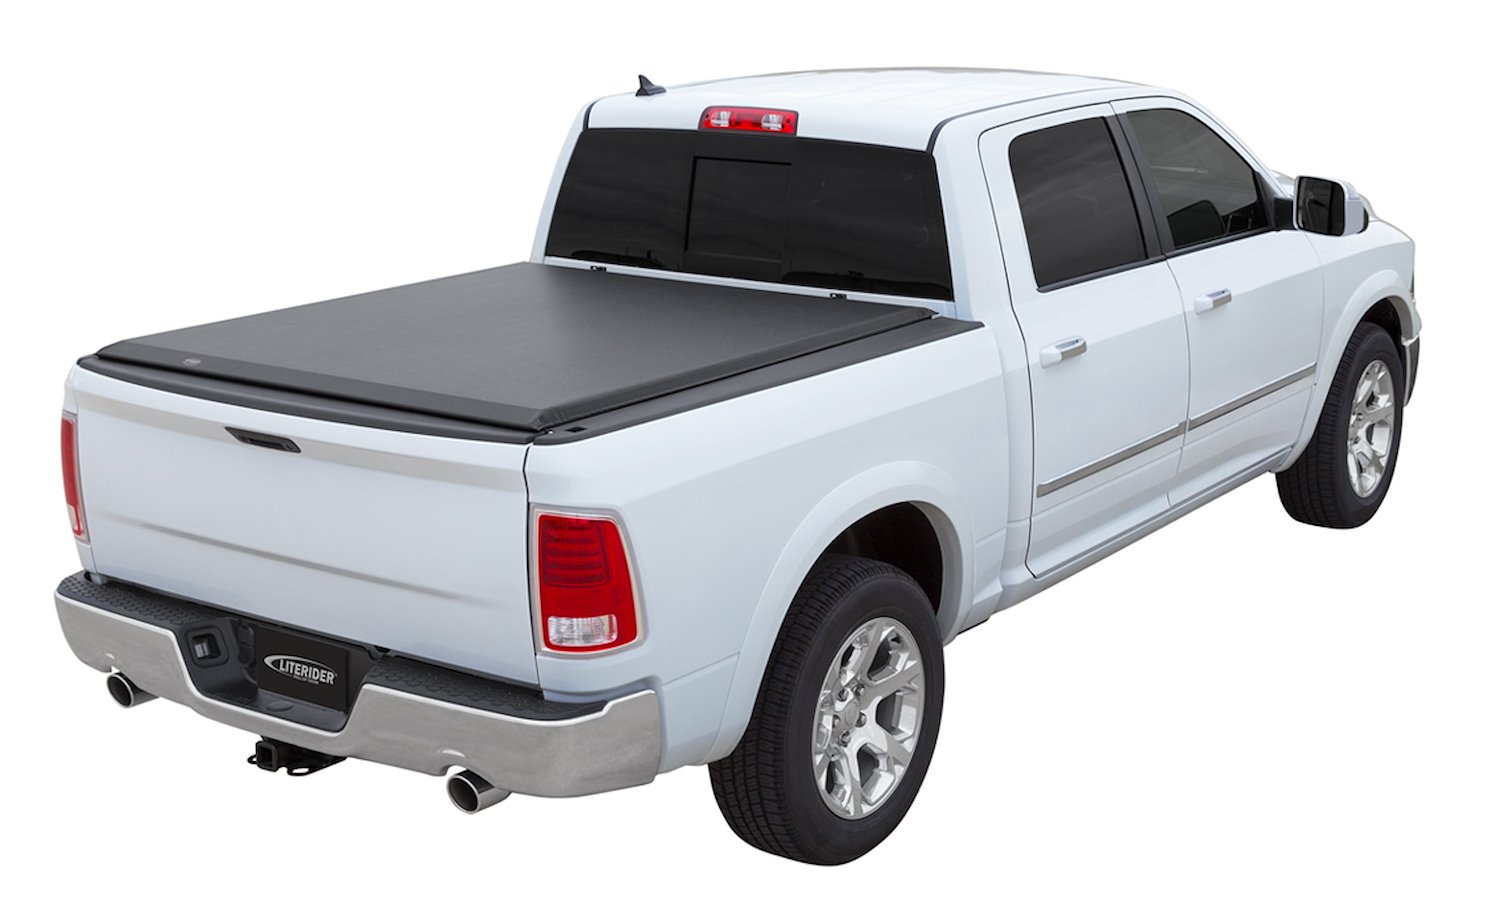 LITERIDER Roll-Up Tonneau Cover, Fits Select Ram 1500, with 5 ft. 7 in. Bed